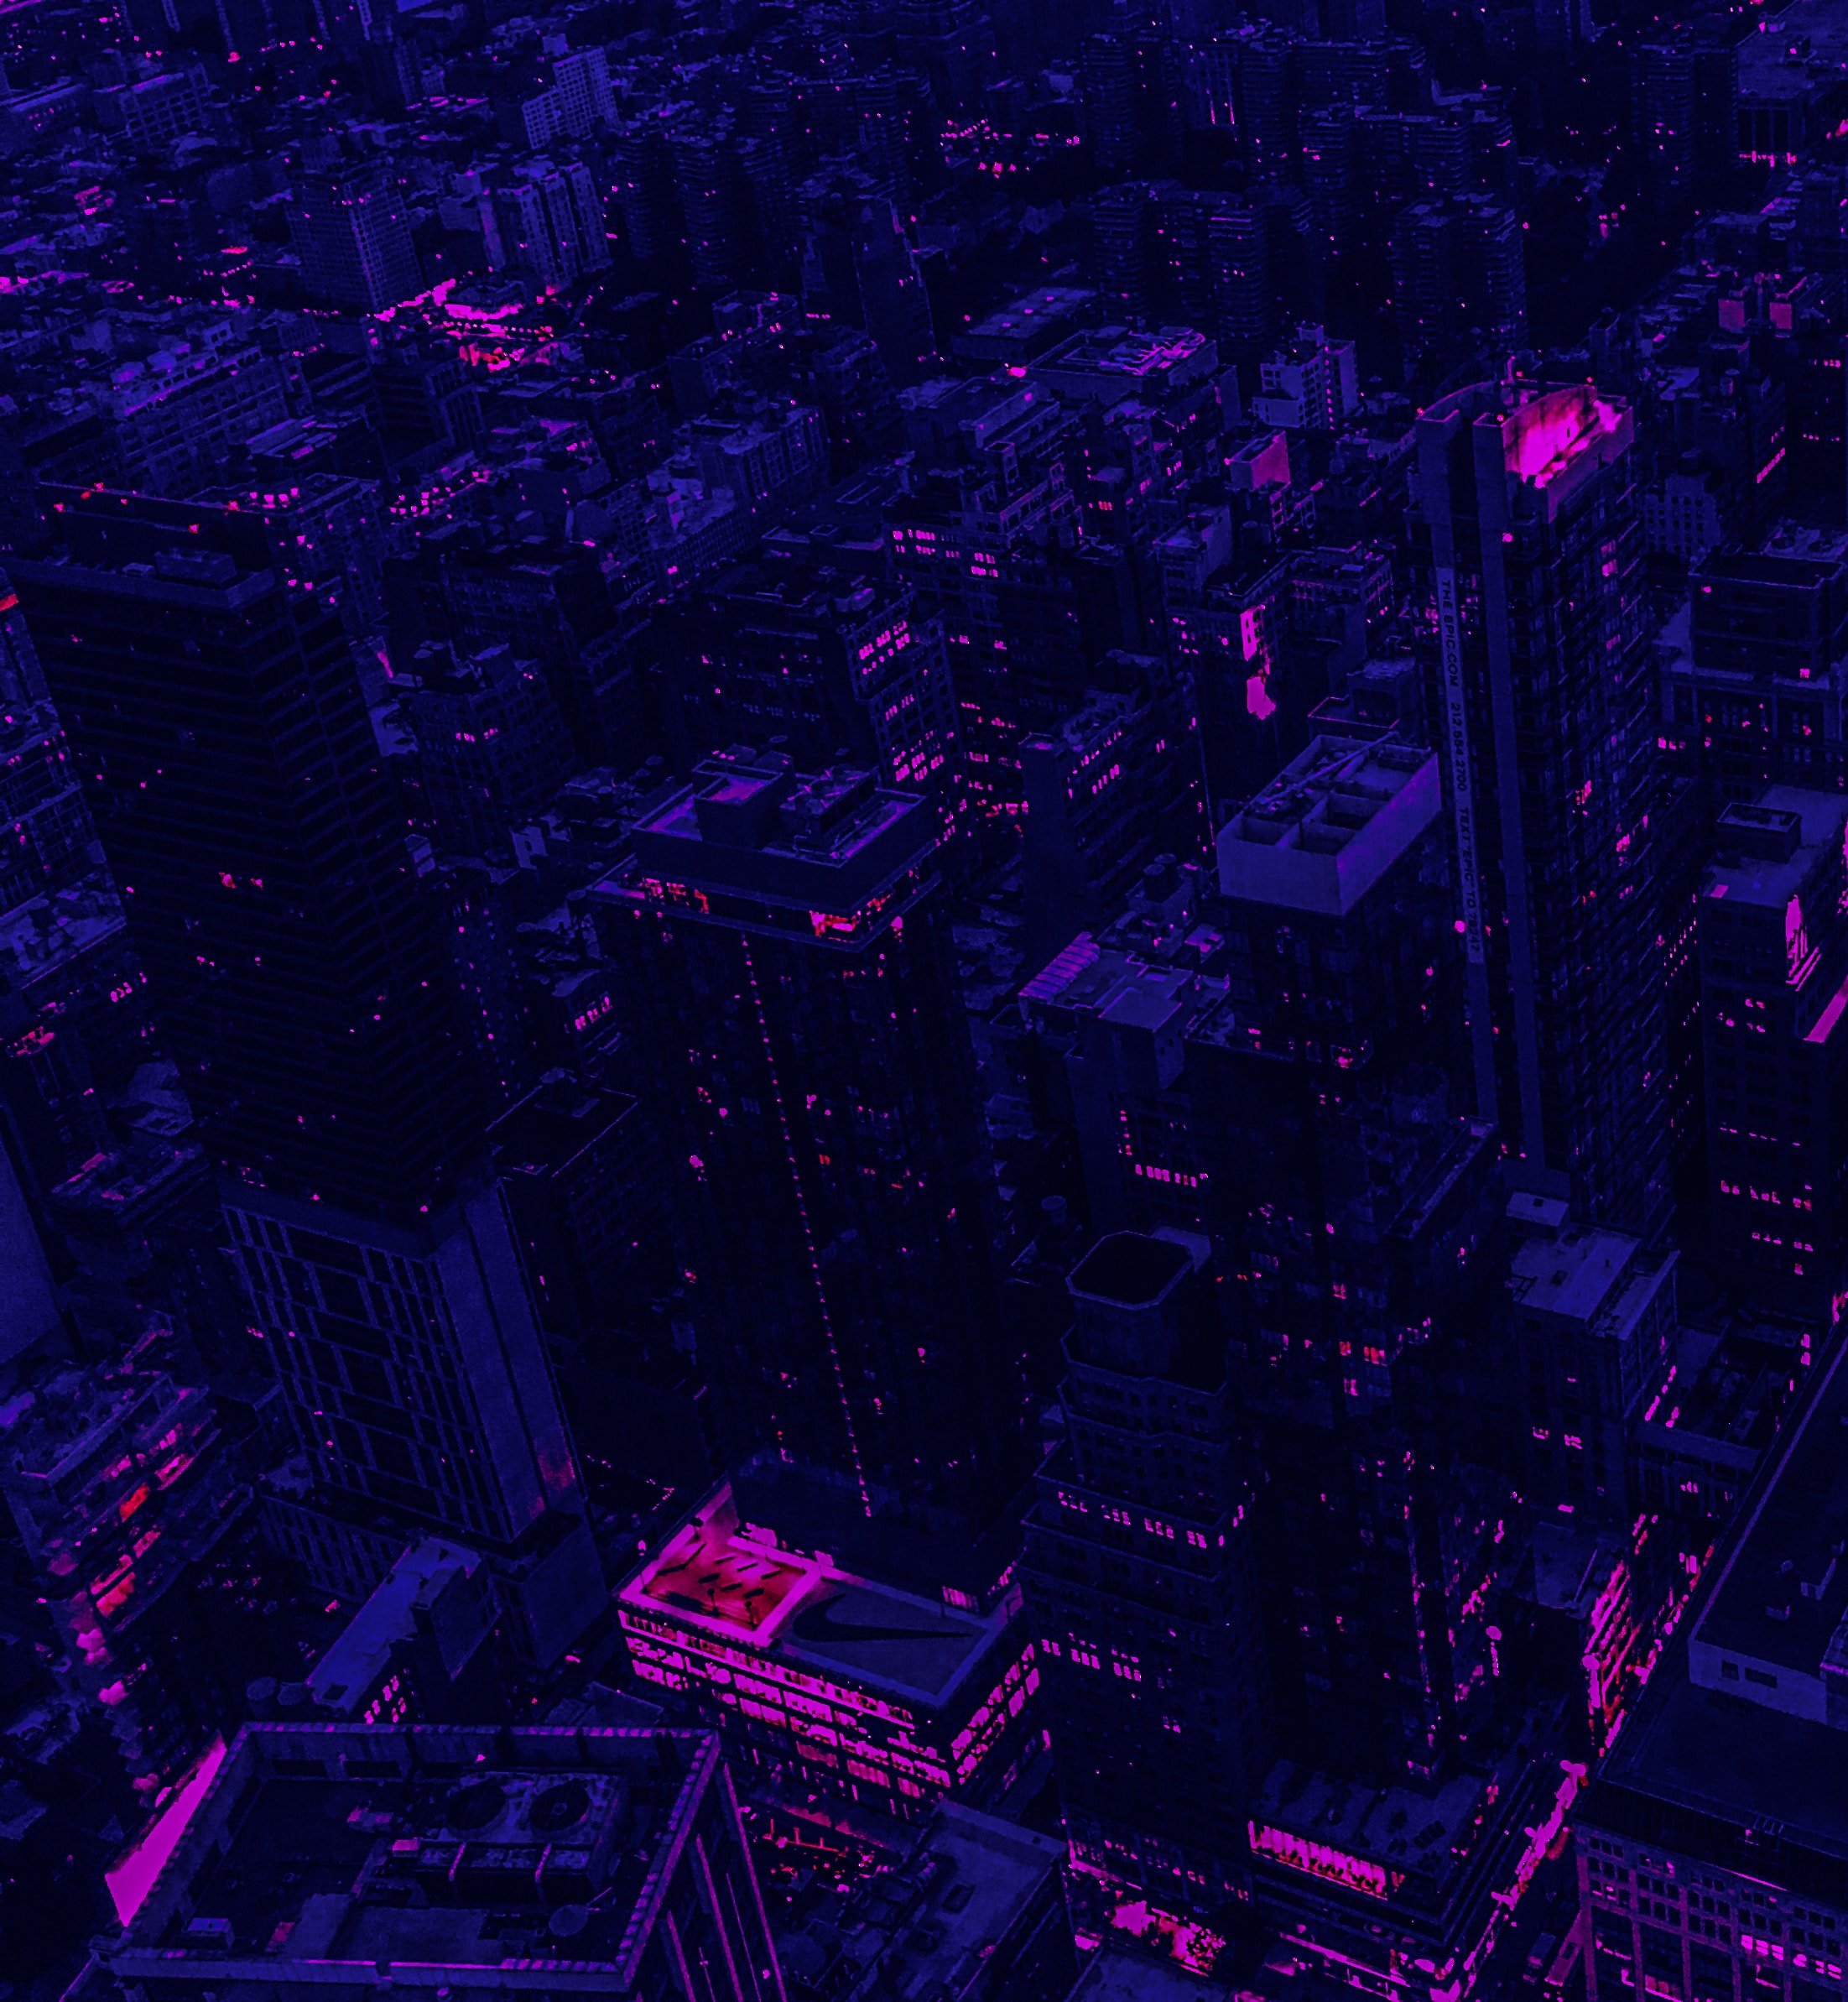 purple, violet, dark, view from above, city, building 1080p